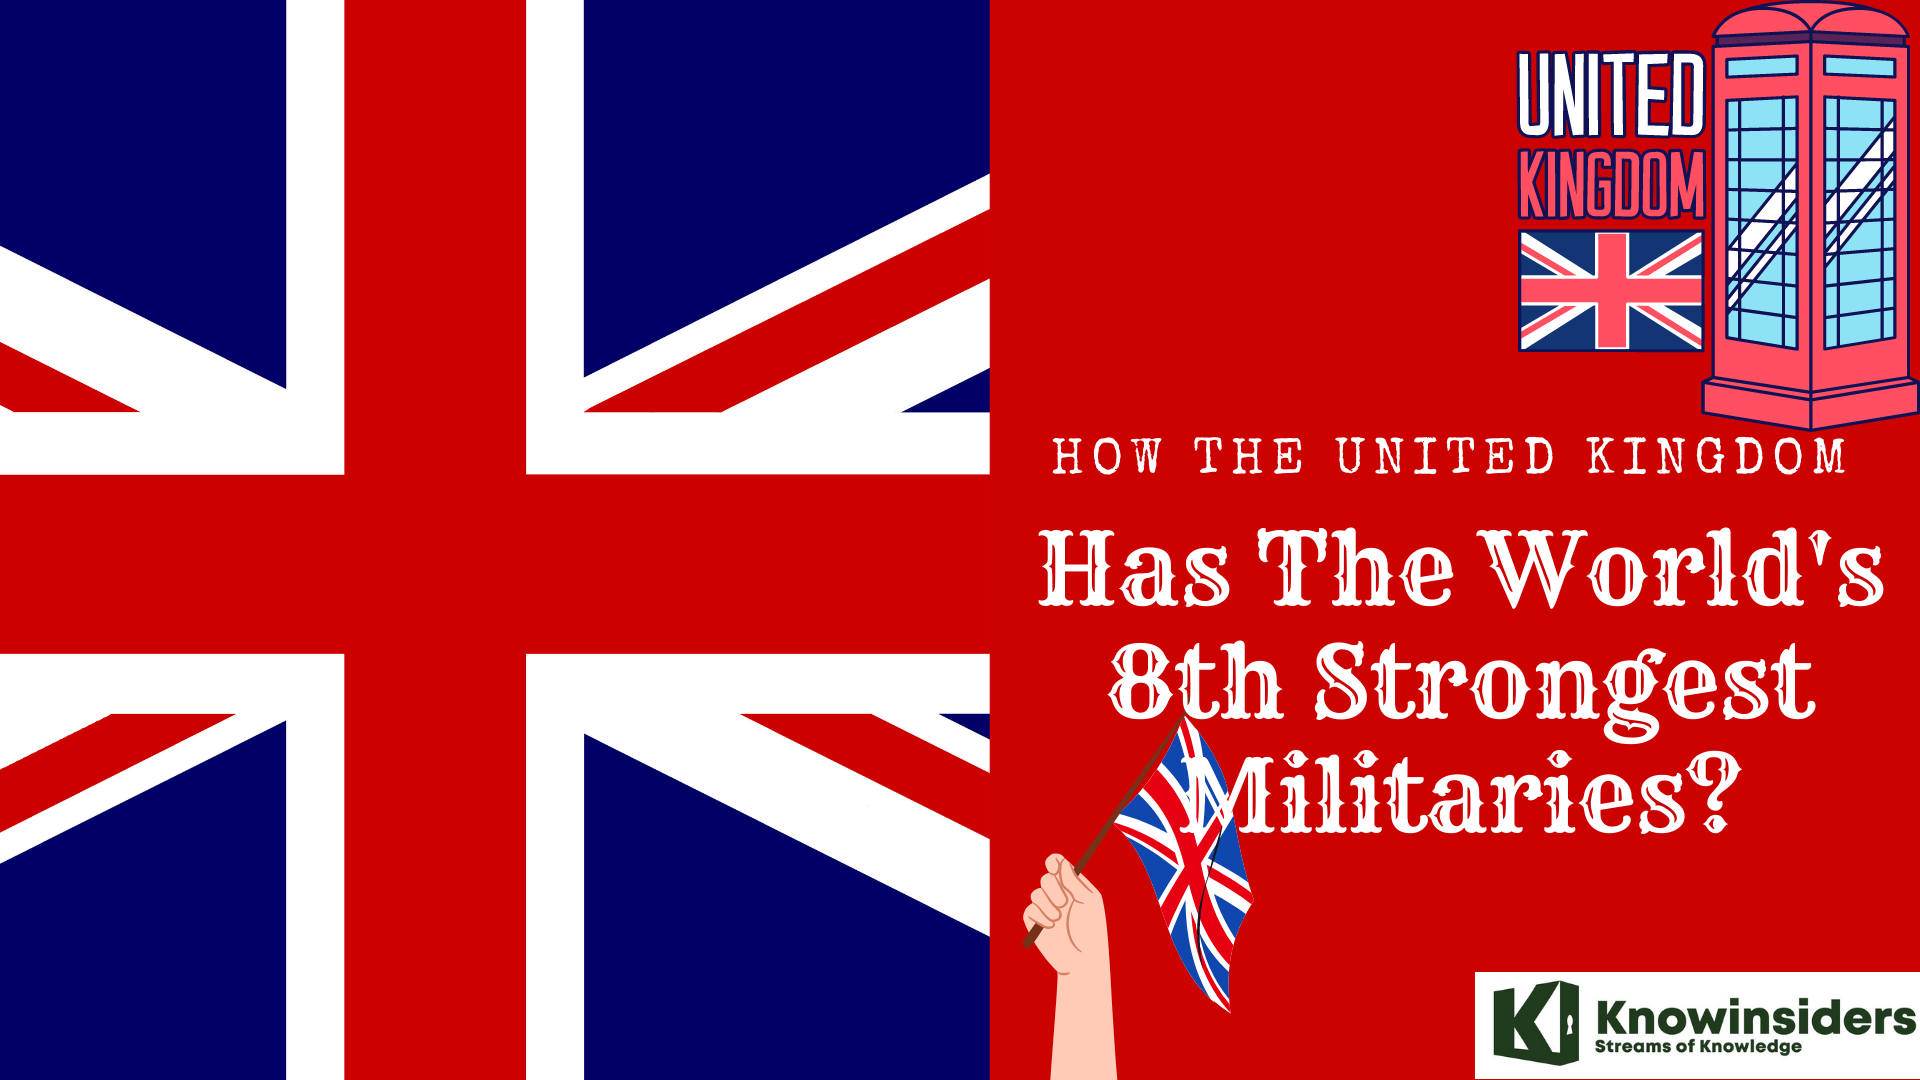 How United Kingdom Has The World's 8th Strongest Militaries?